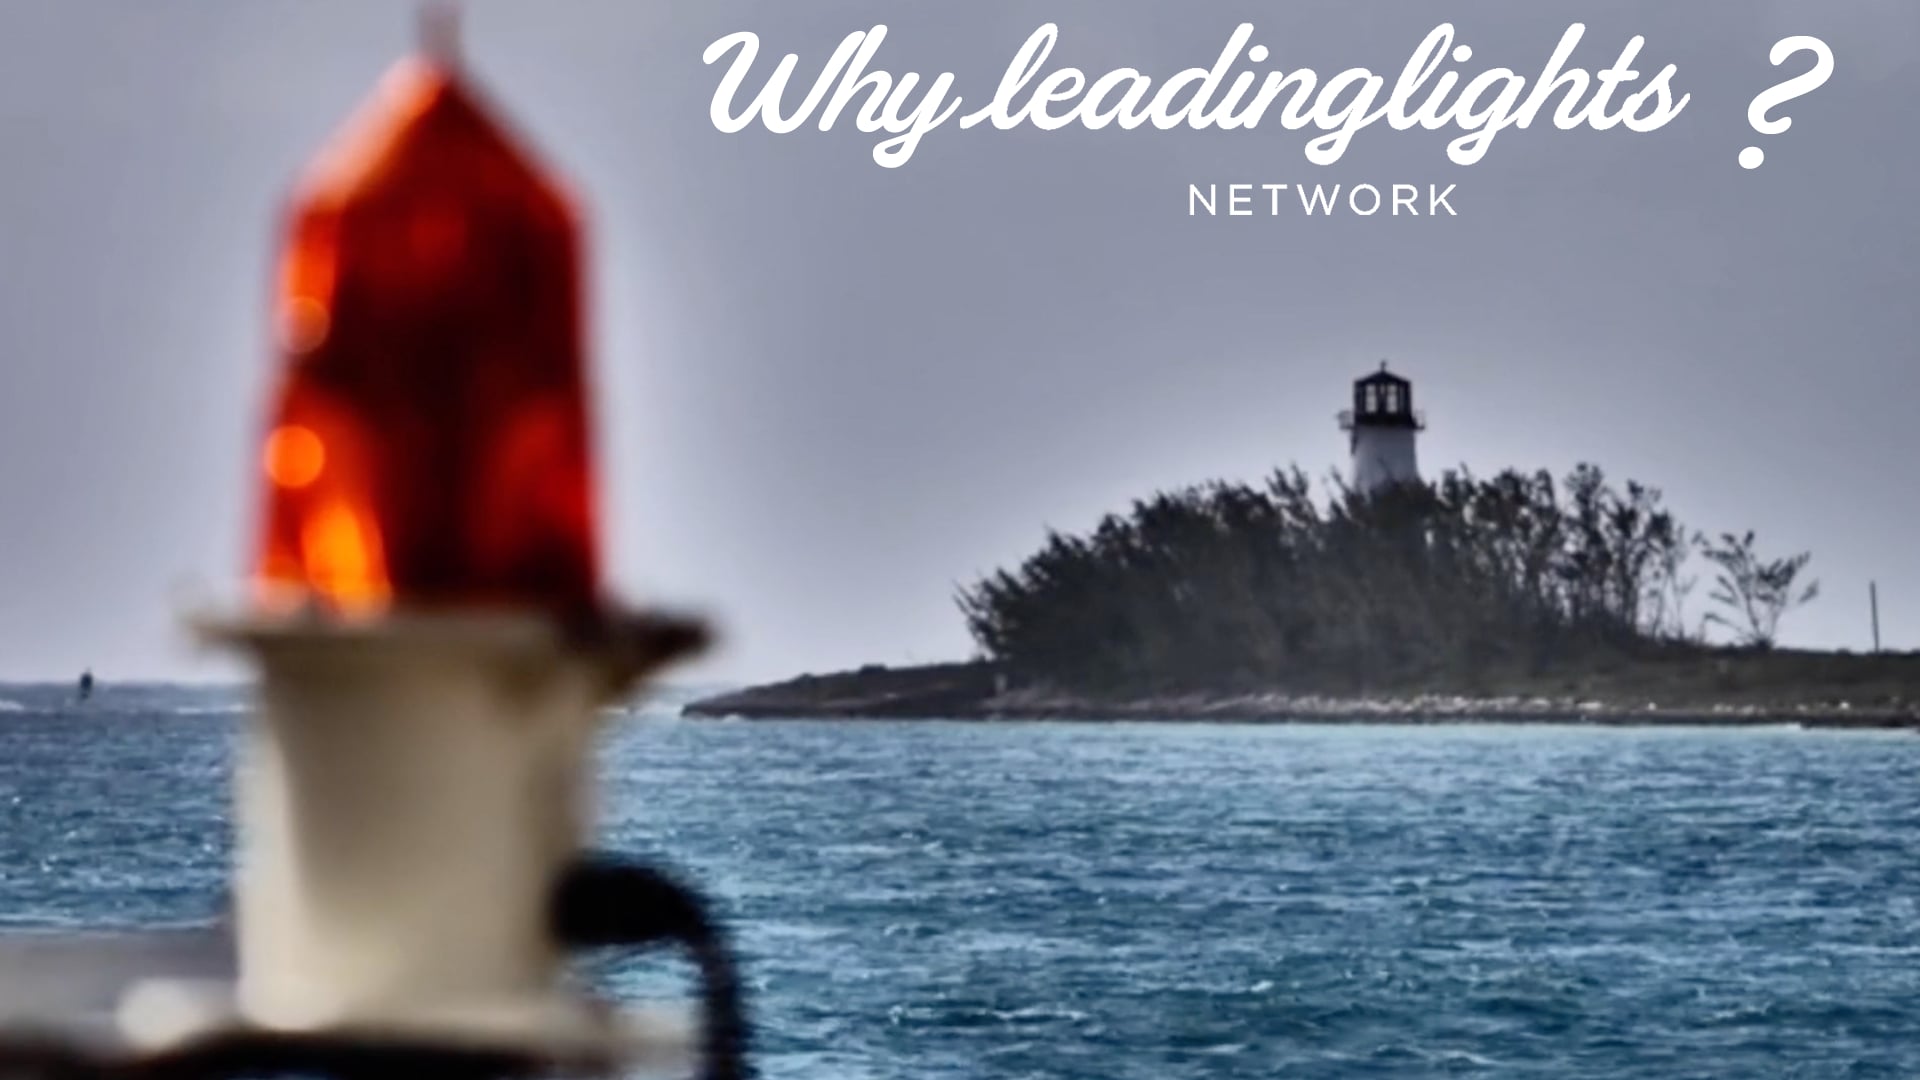 Why Are We Called Leading Lights?